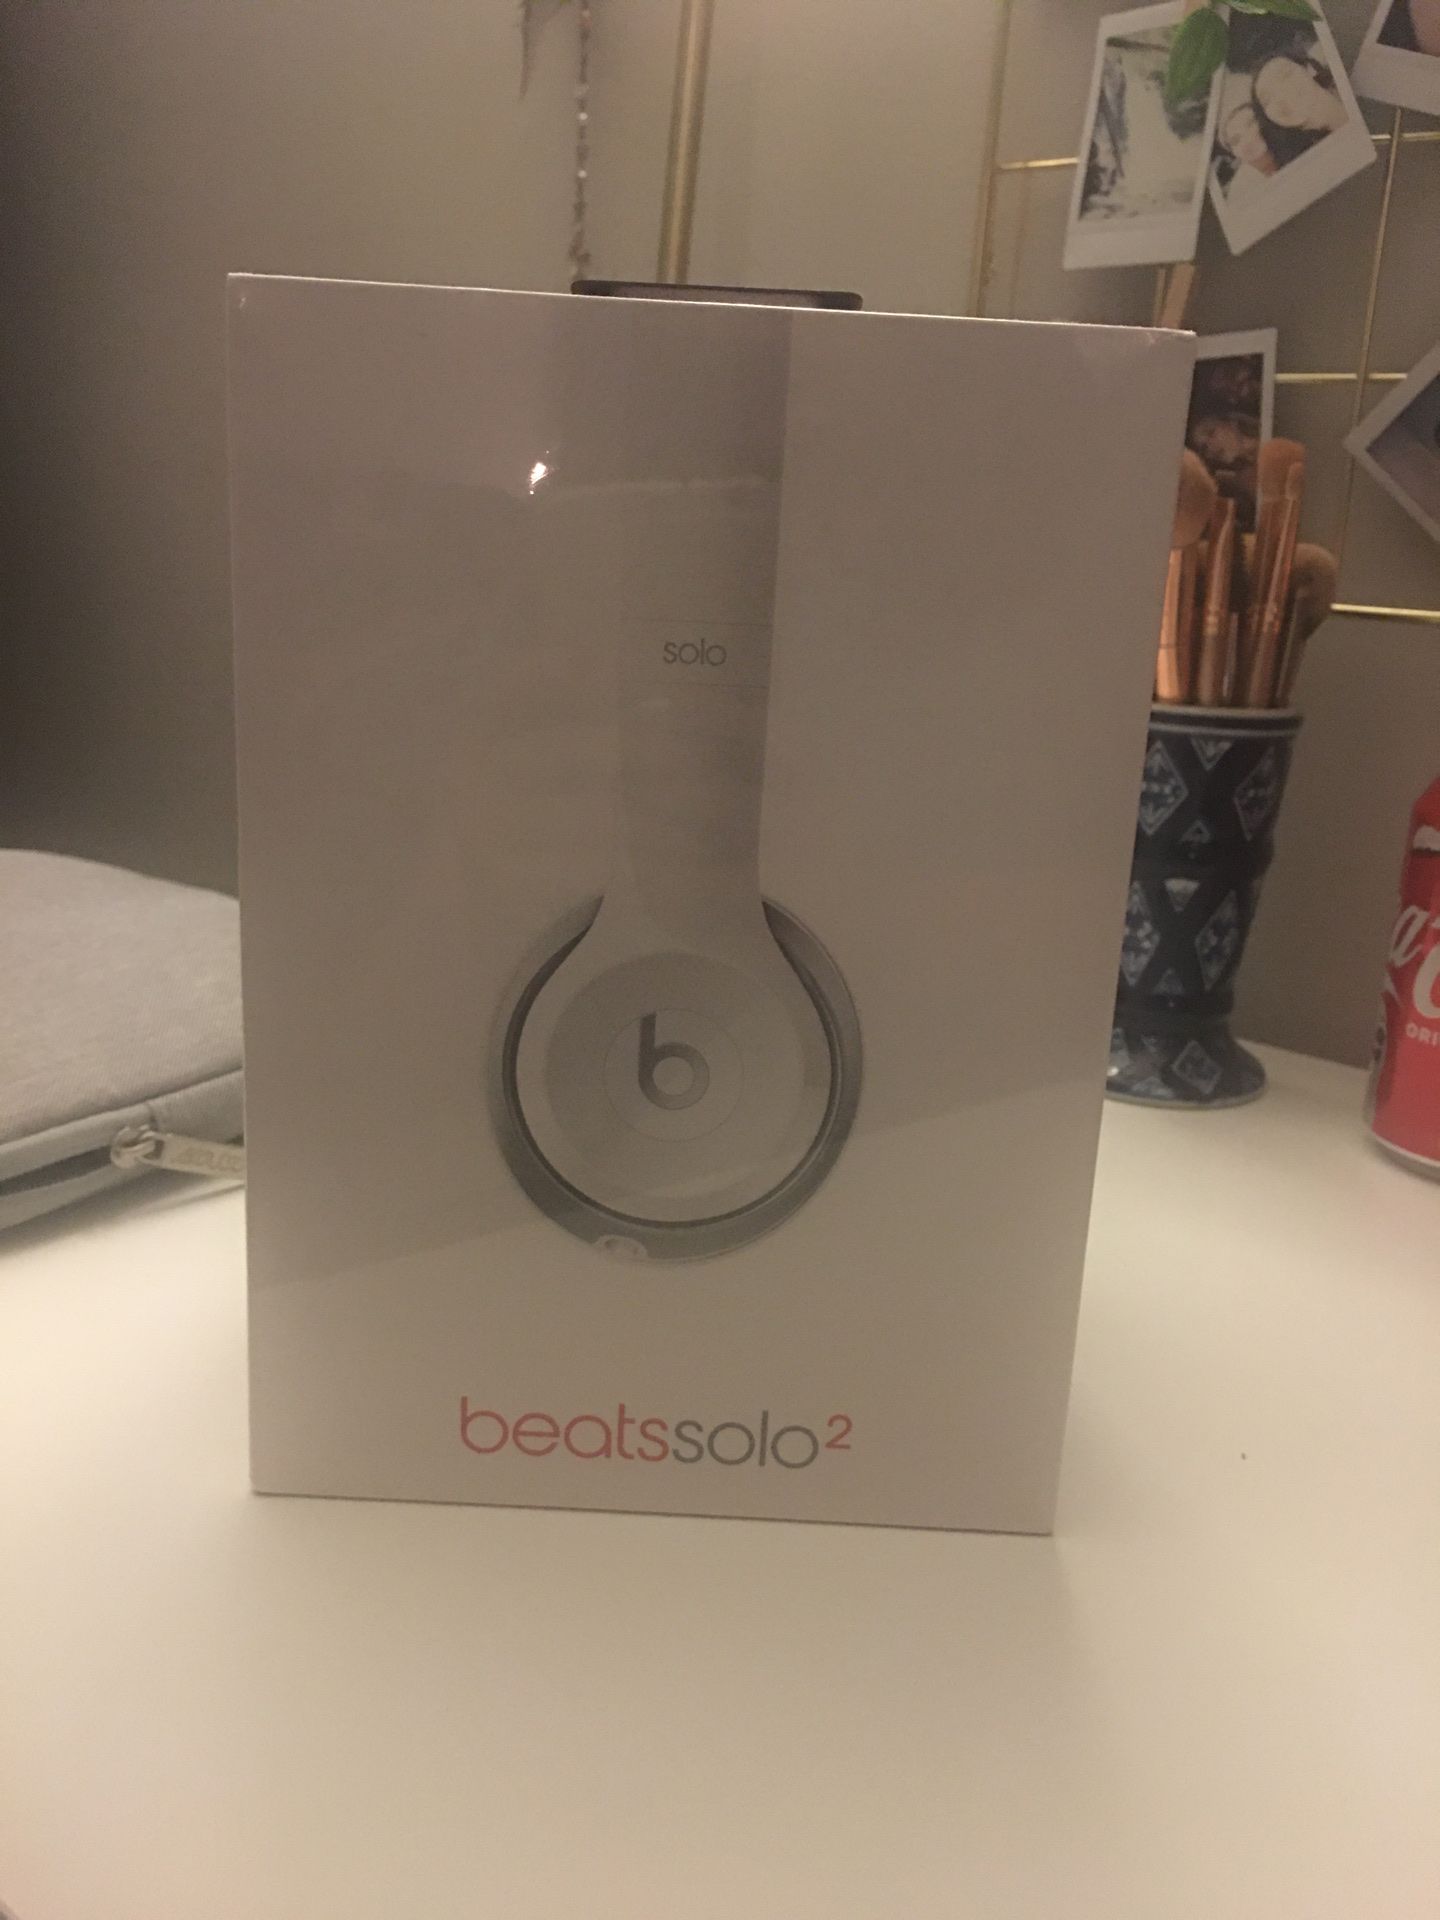 Solo beats 2 wired brand new